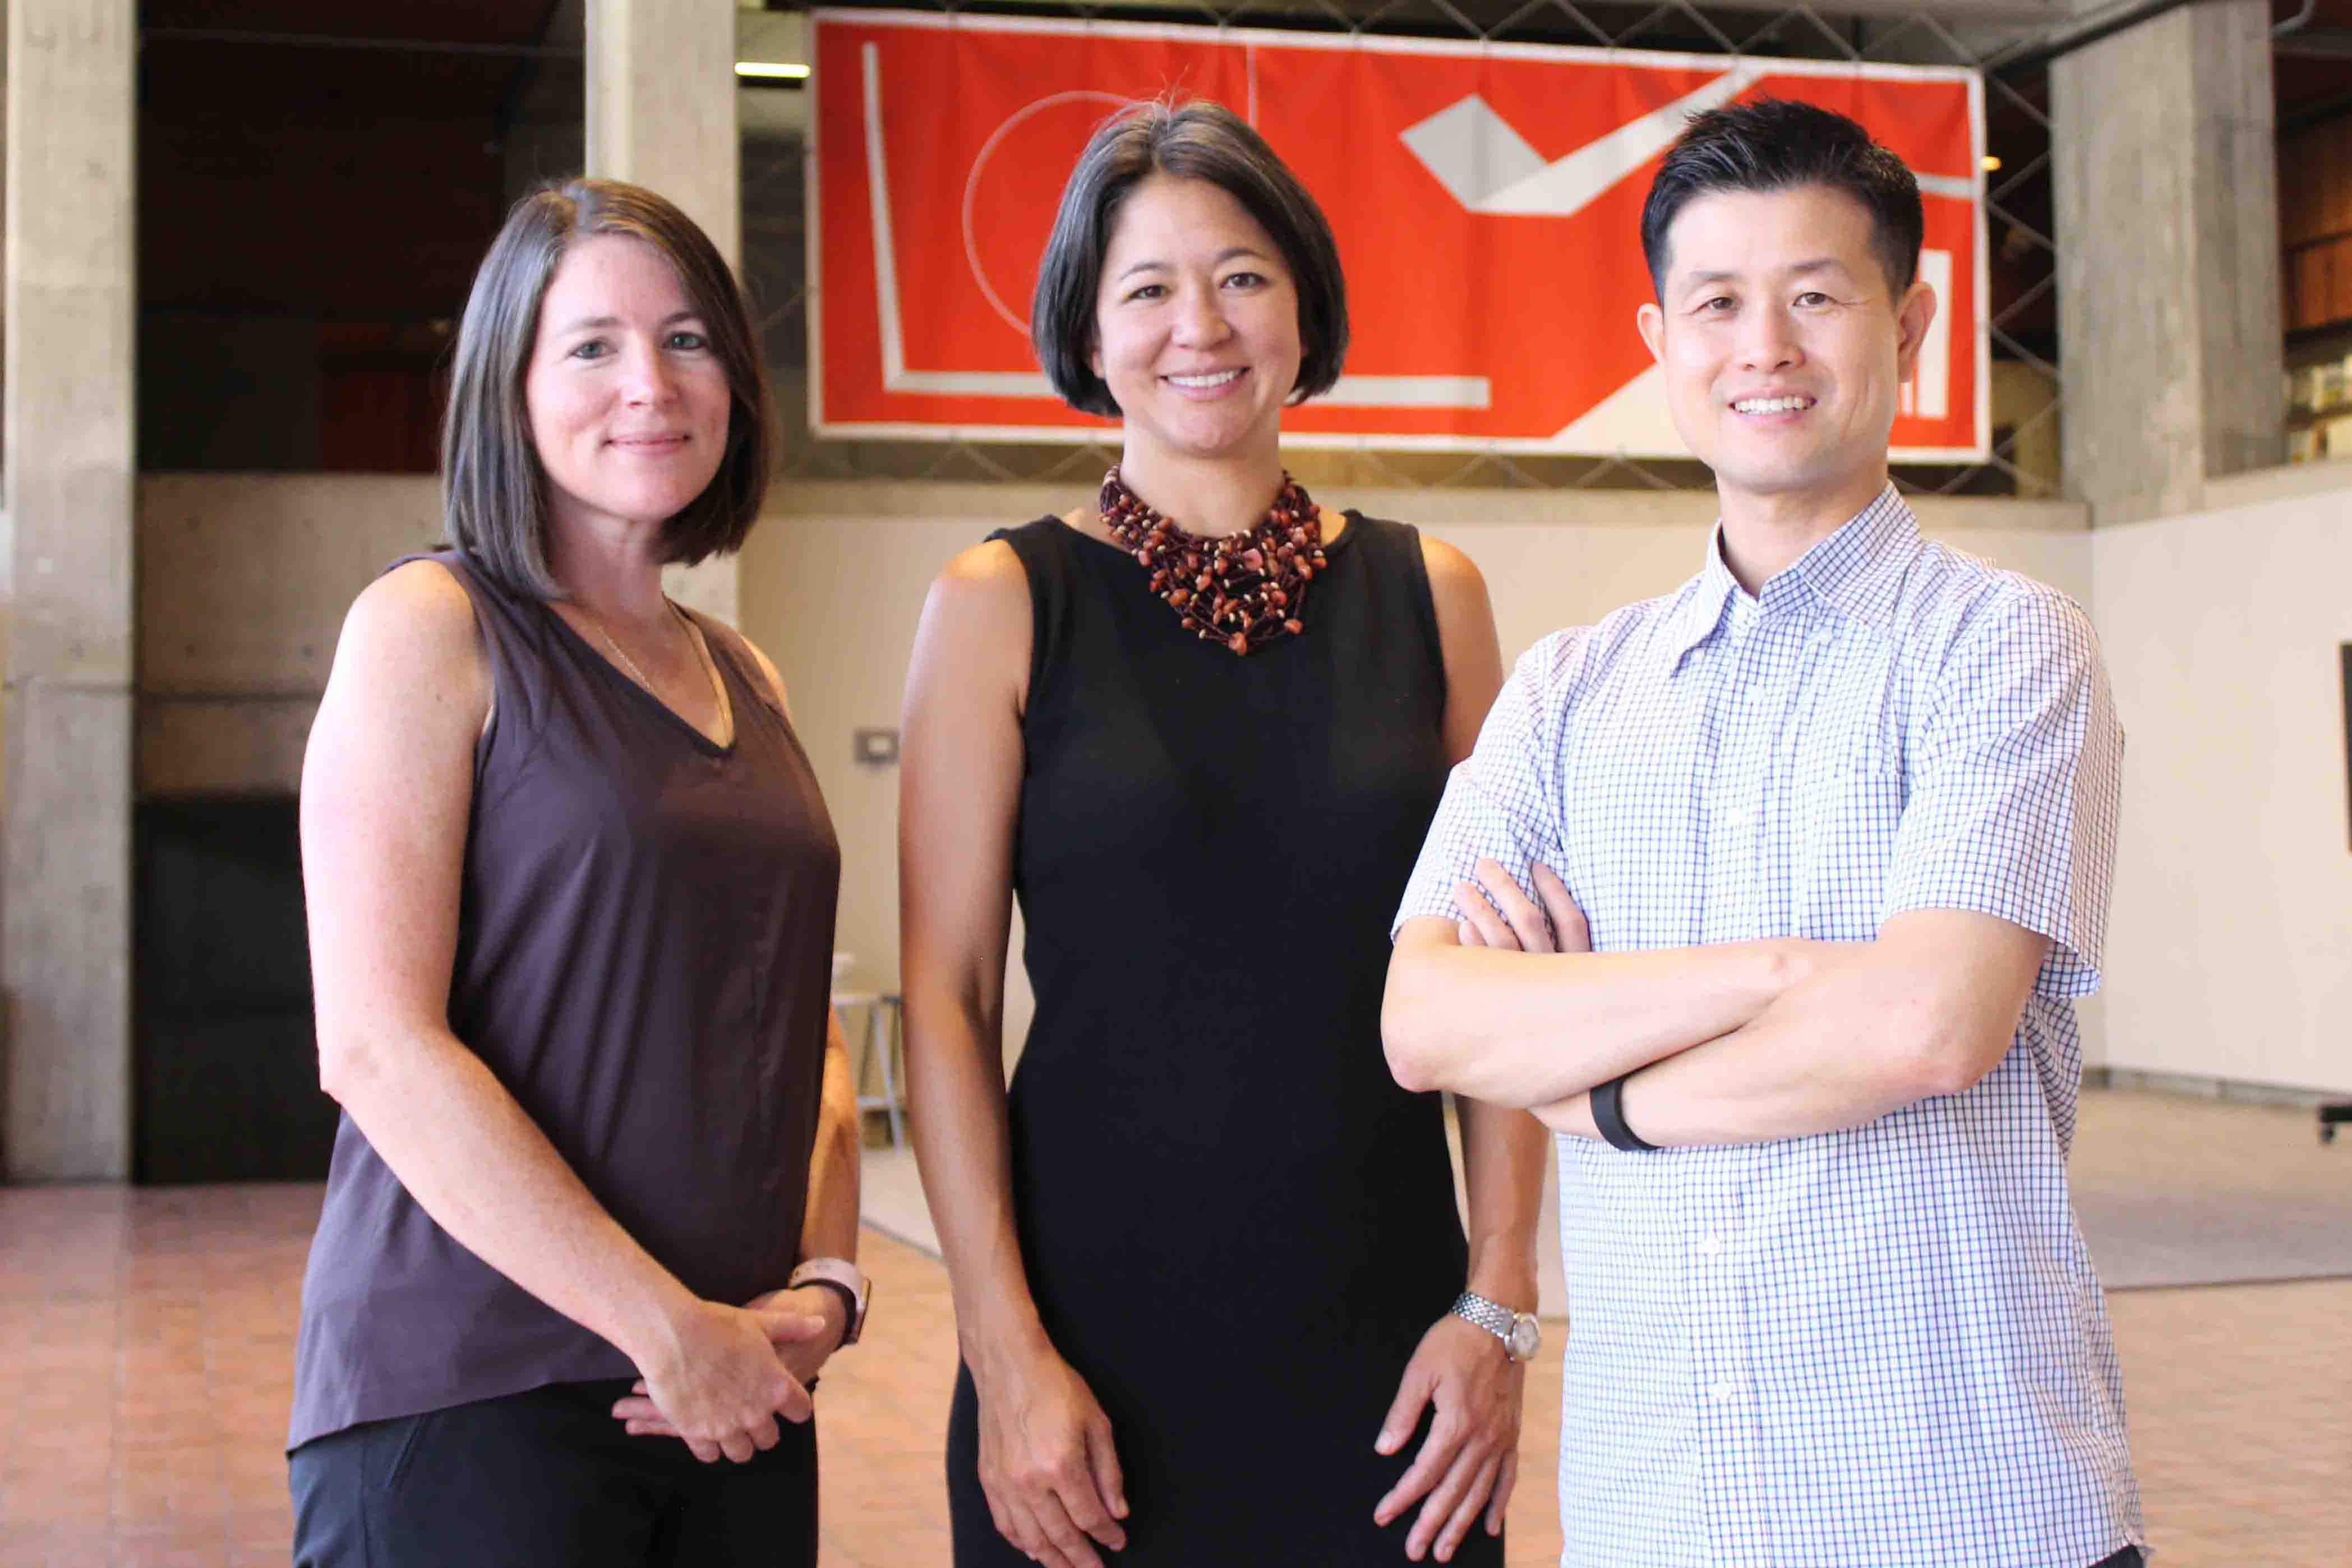 Sarah Canham, Valerie Greer, and Andy Hong